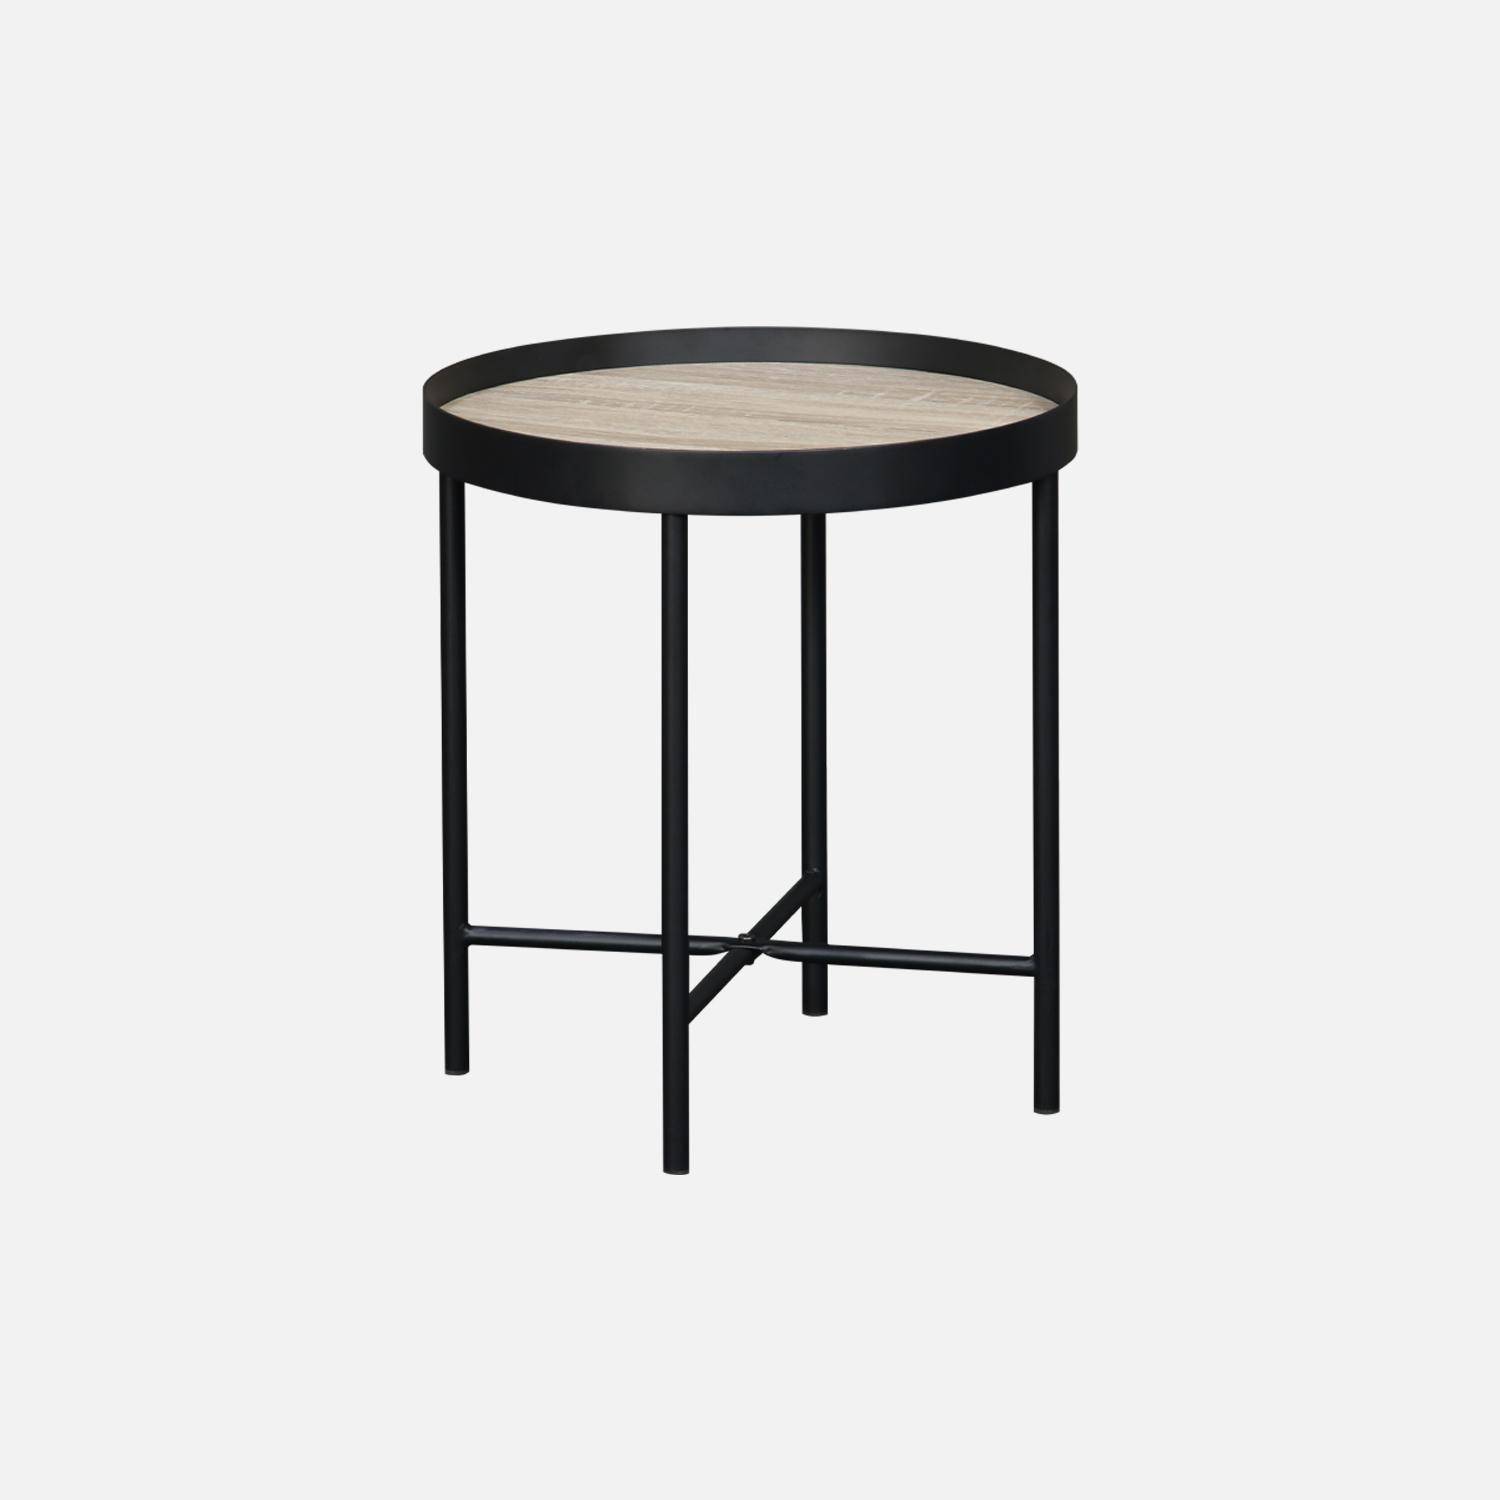 Set of 2 practical round nesting tables in oak-effect MDF with black legs,sweeek,Photo5